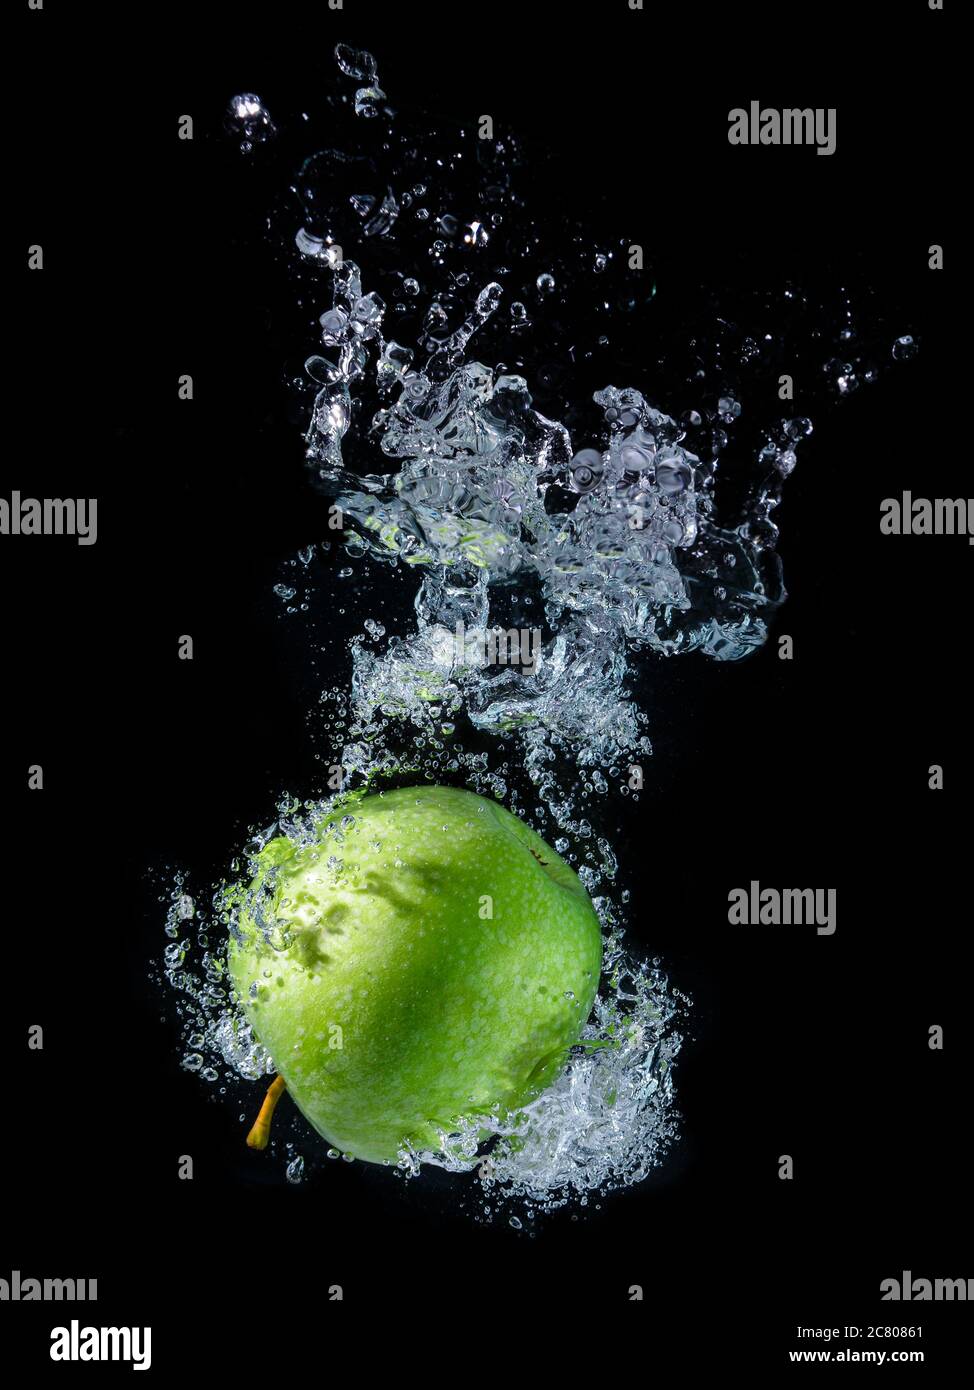 Water splashing and green apple with black background. Stock Photo